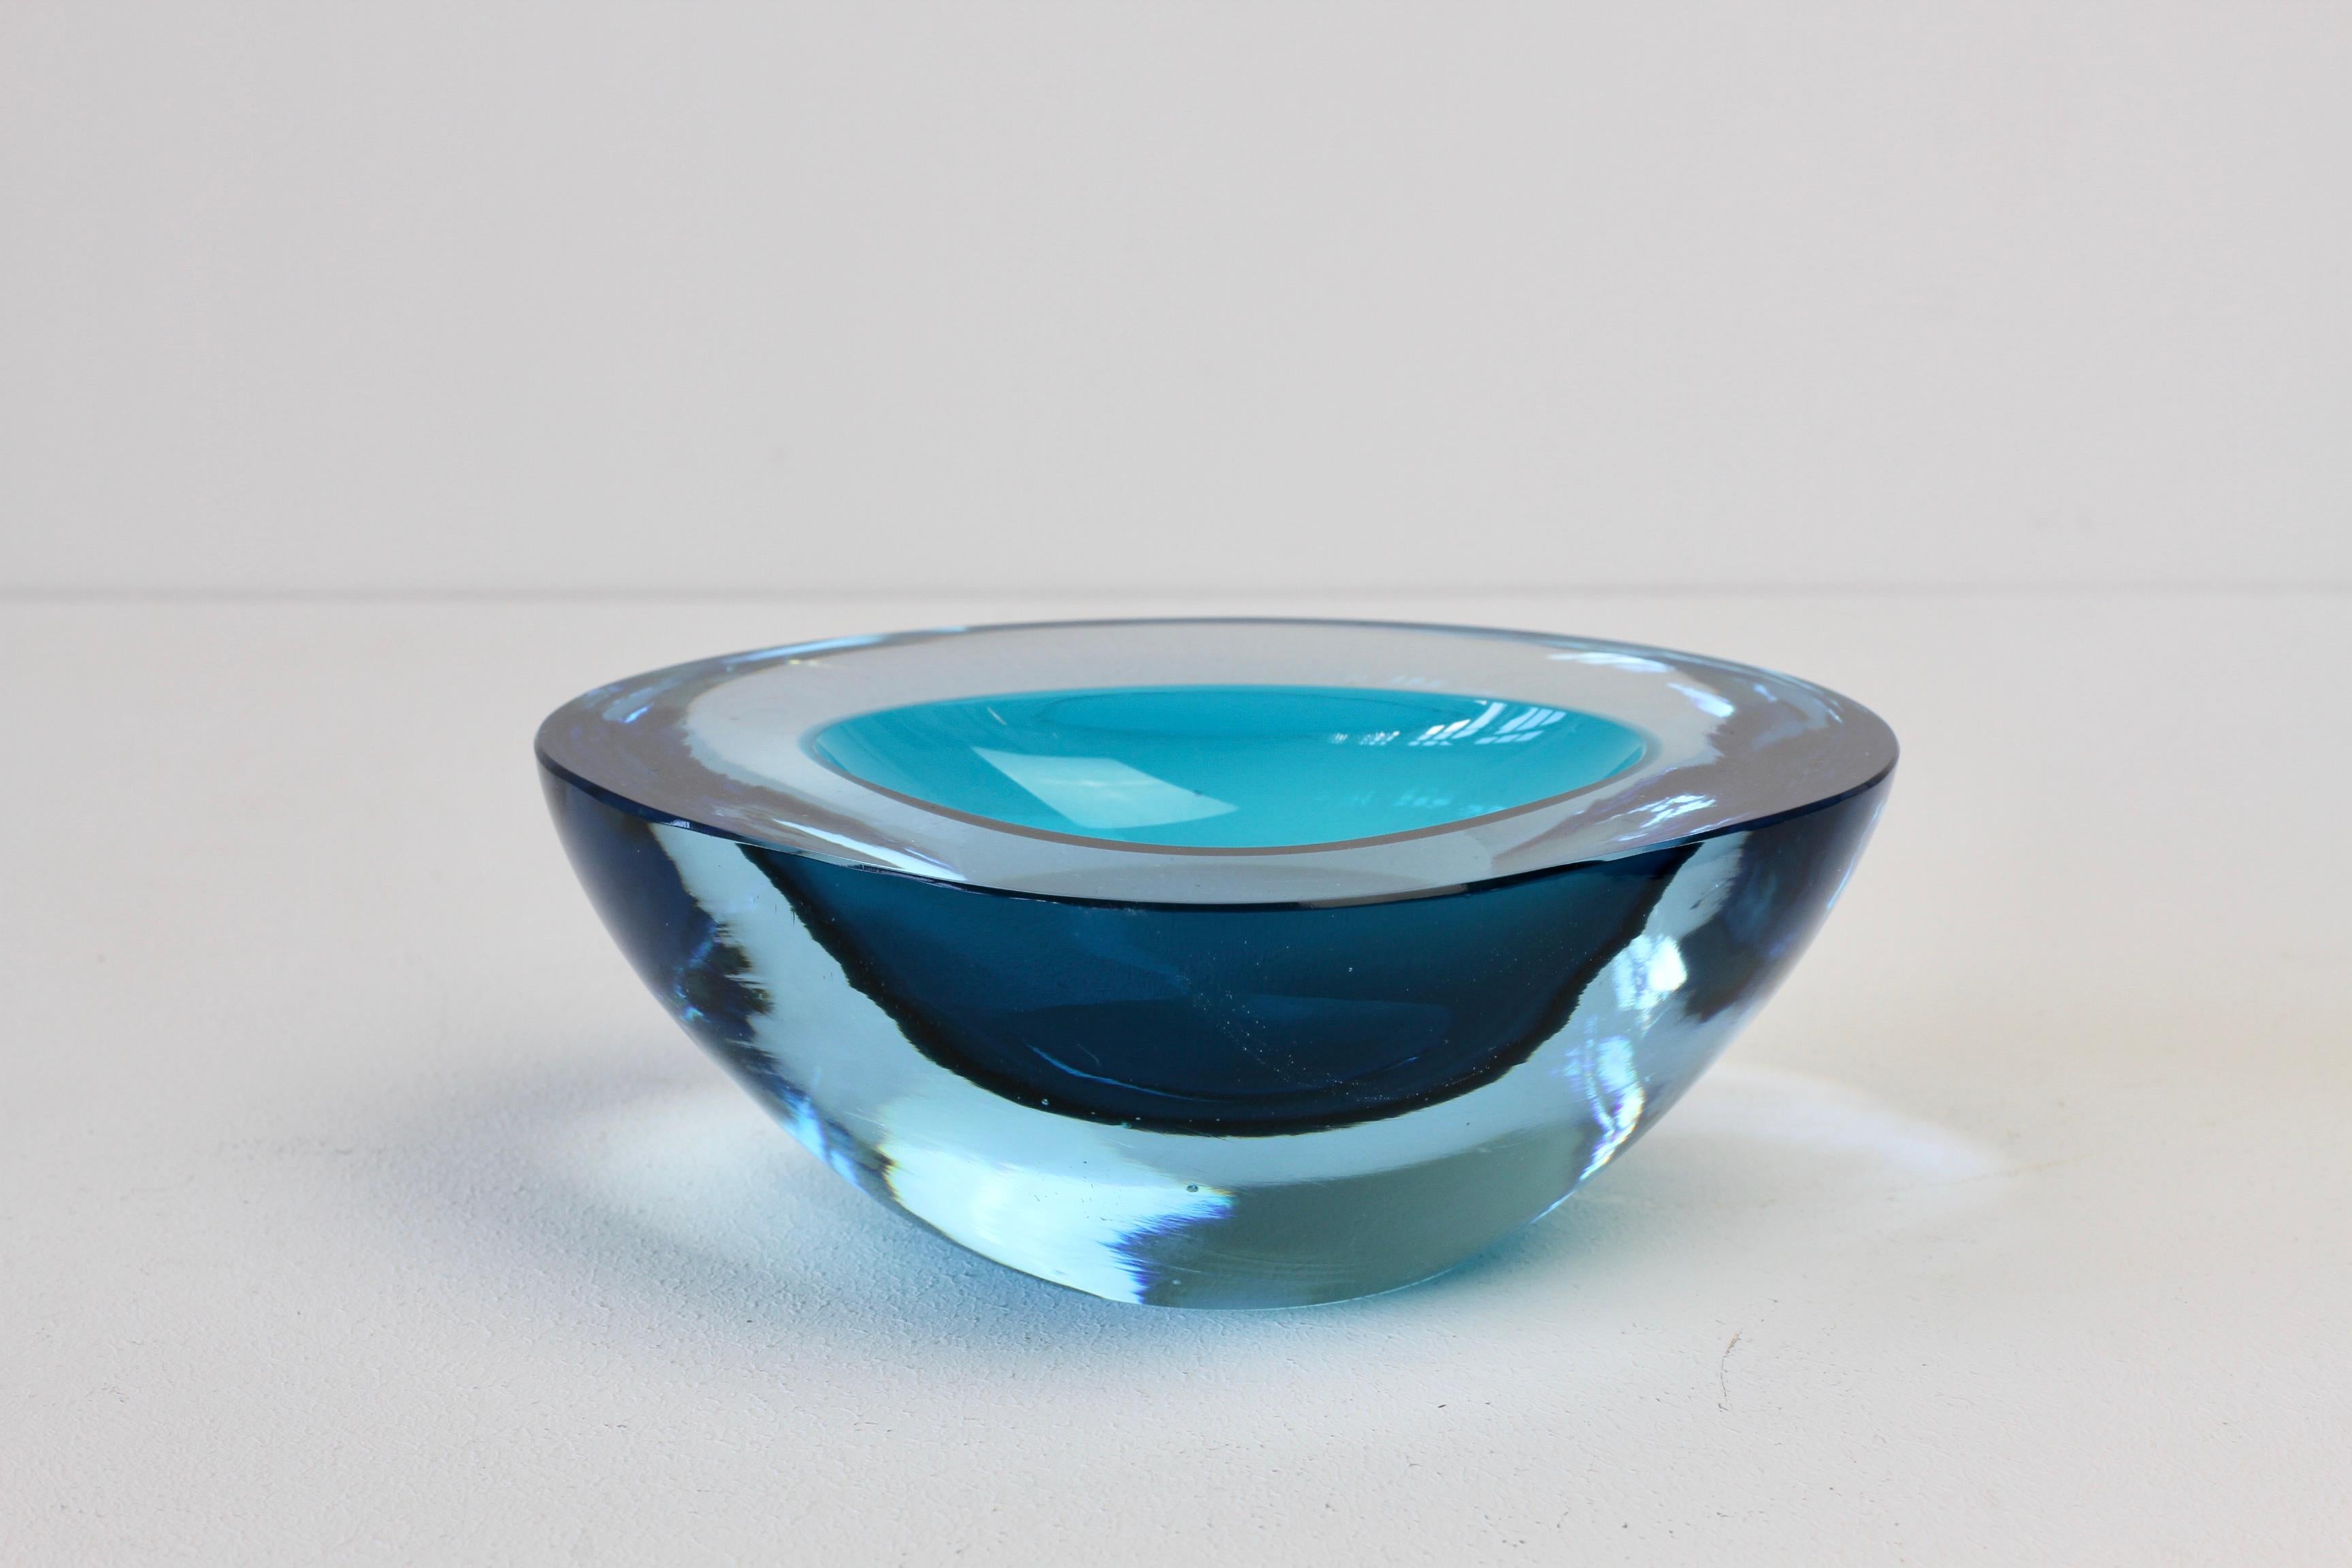 Large Cenedese Italian Asymmetric Blue Sommerso Murano Glass Bowl, Dish, Ashtray For Sale 7